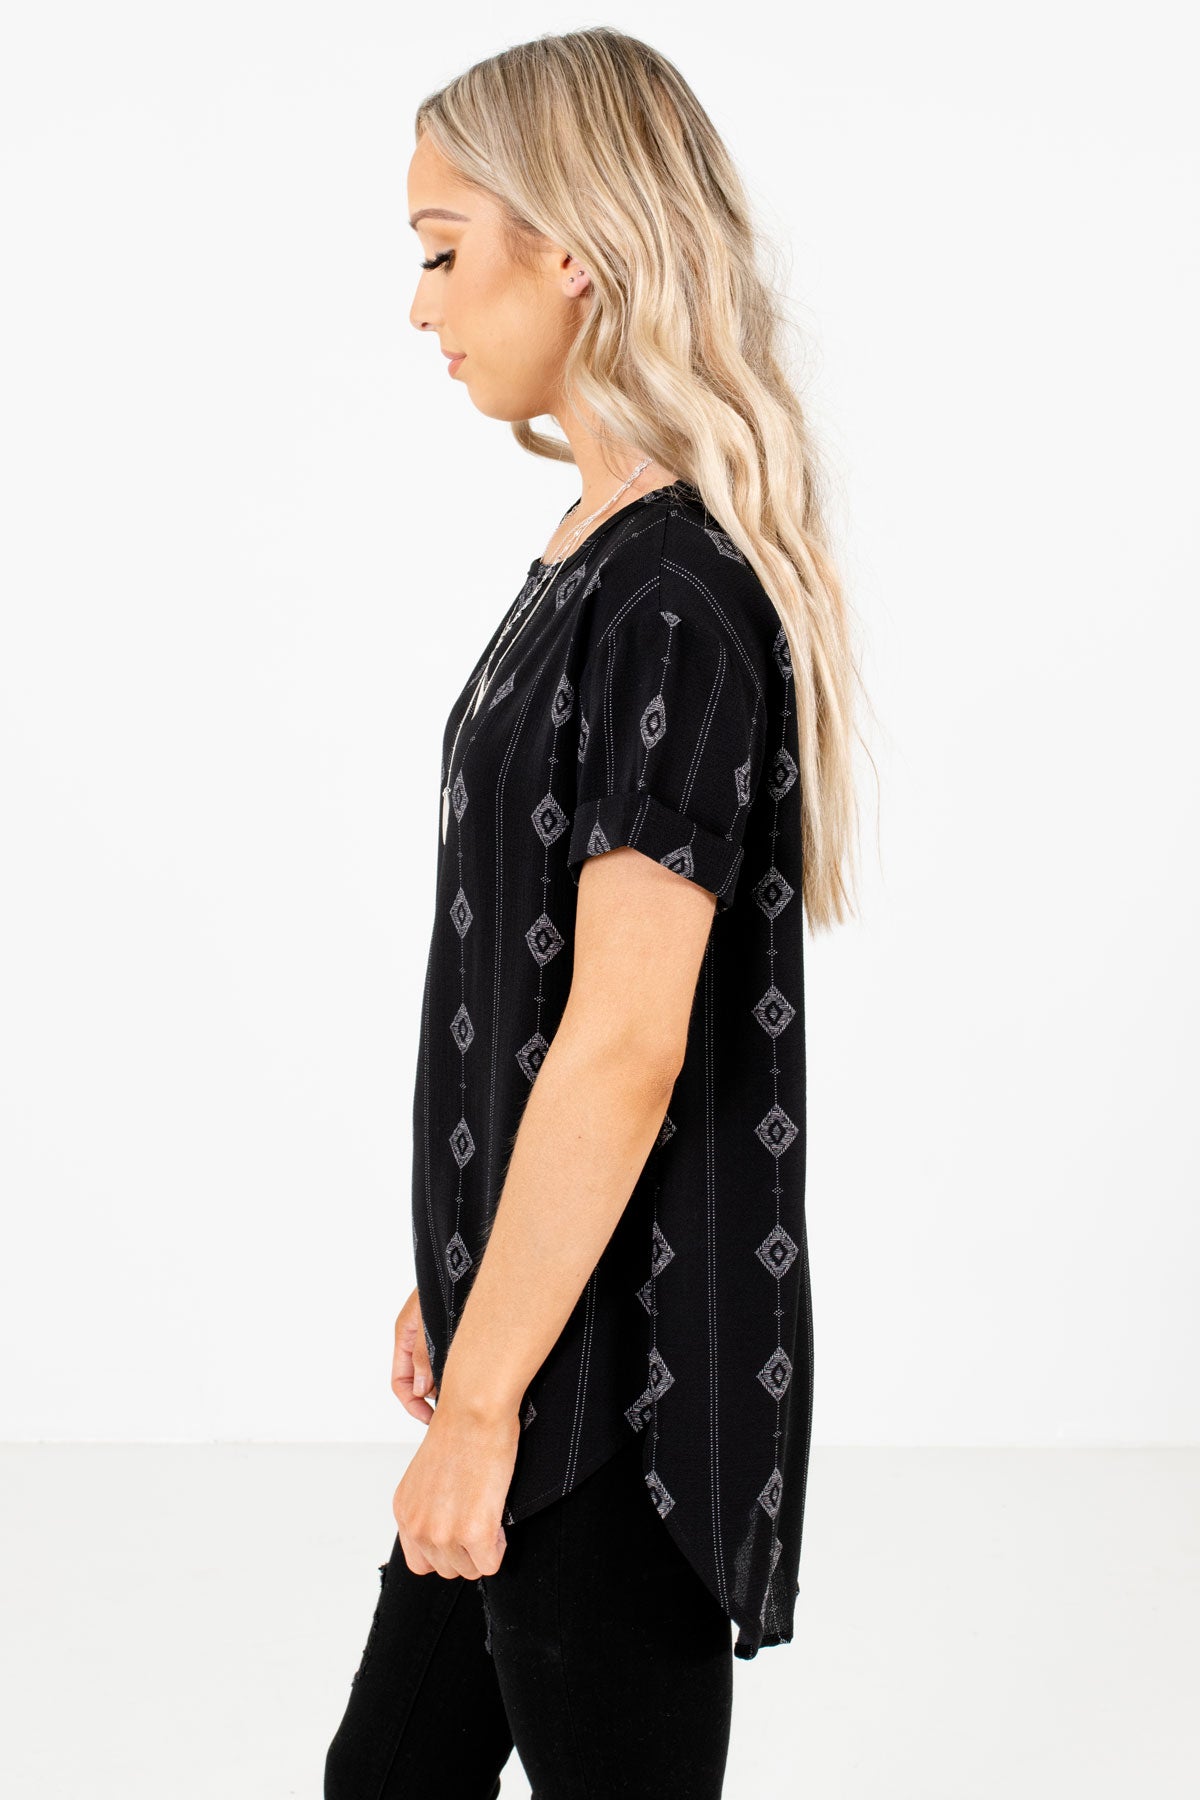 Black Cuffed Sleeve Boutique Tops for Women